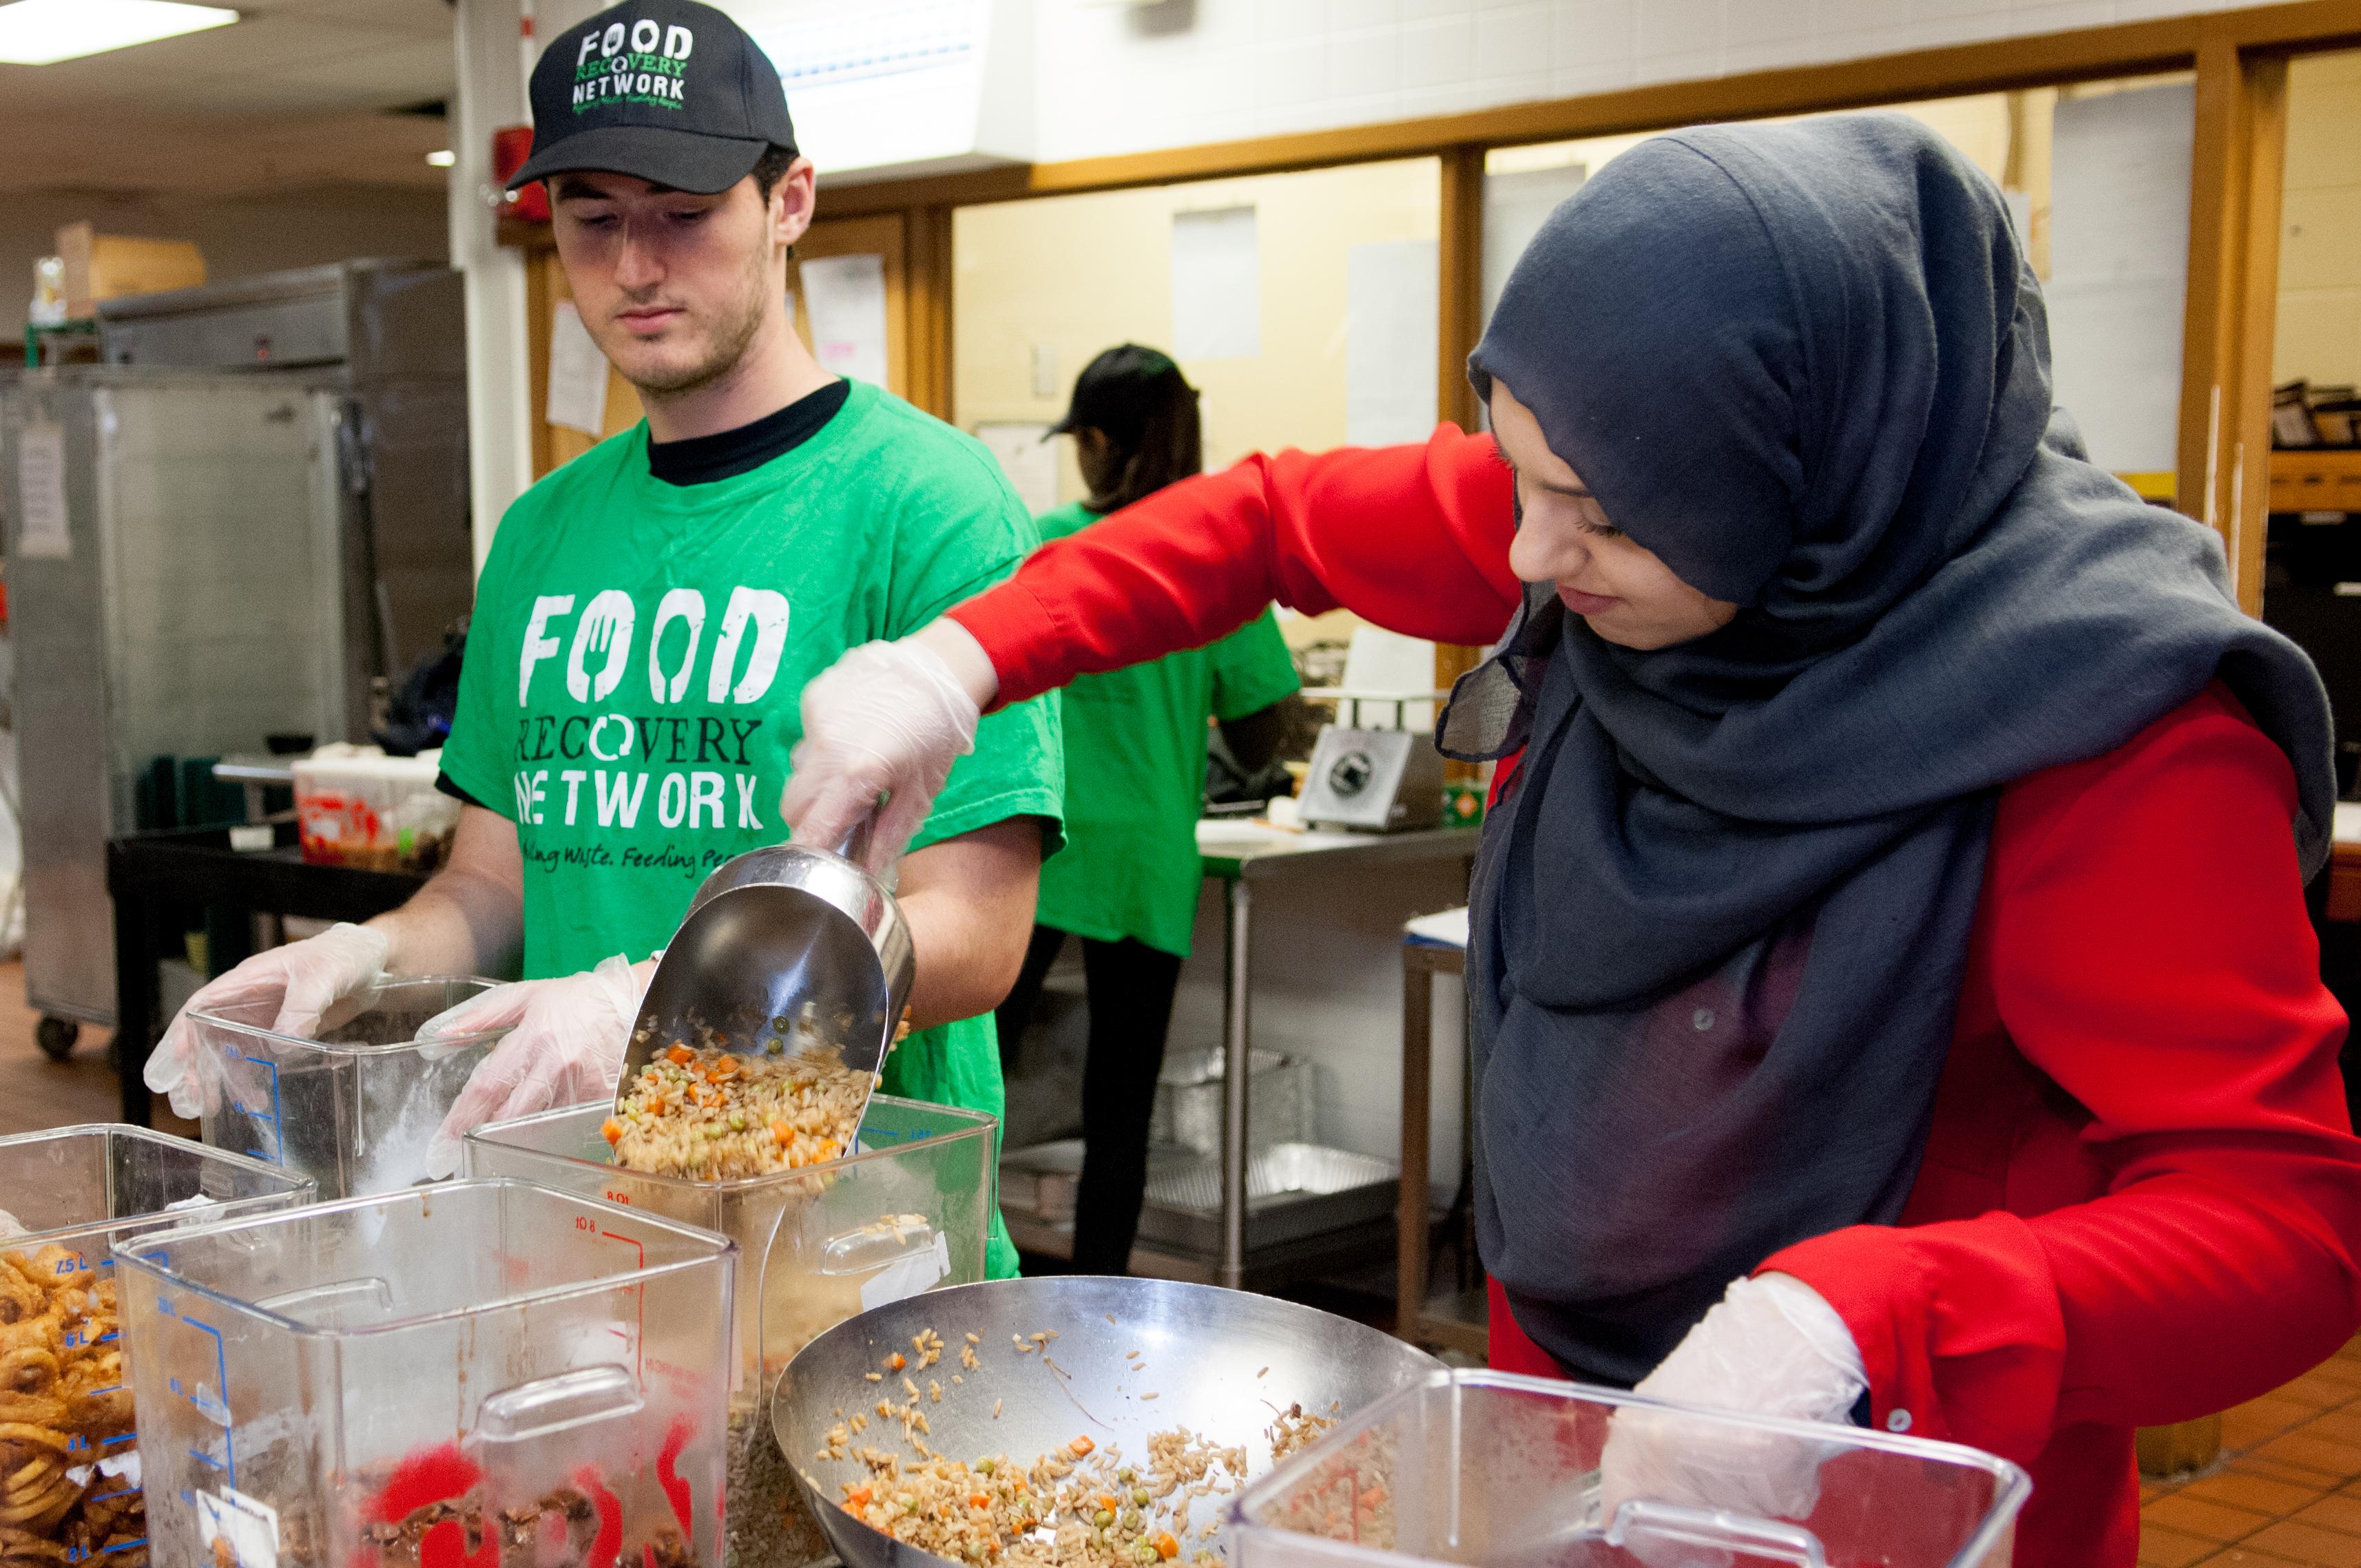 Student volunteers with the Food Recovery Network